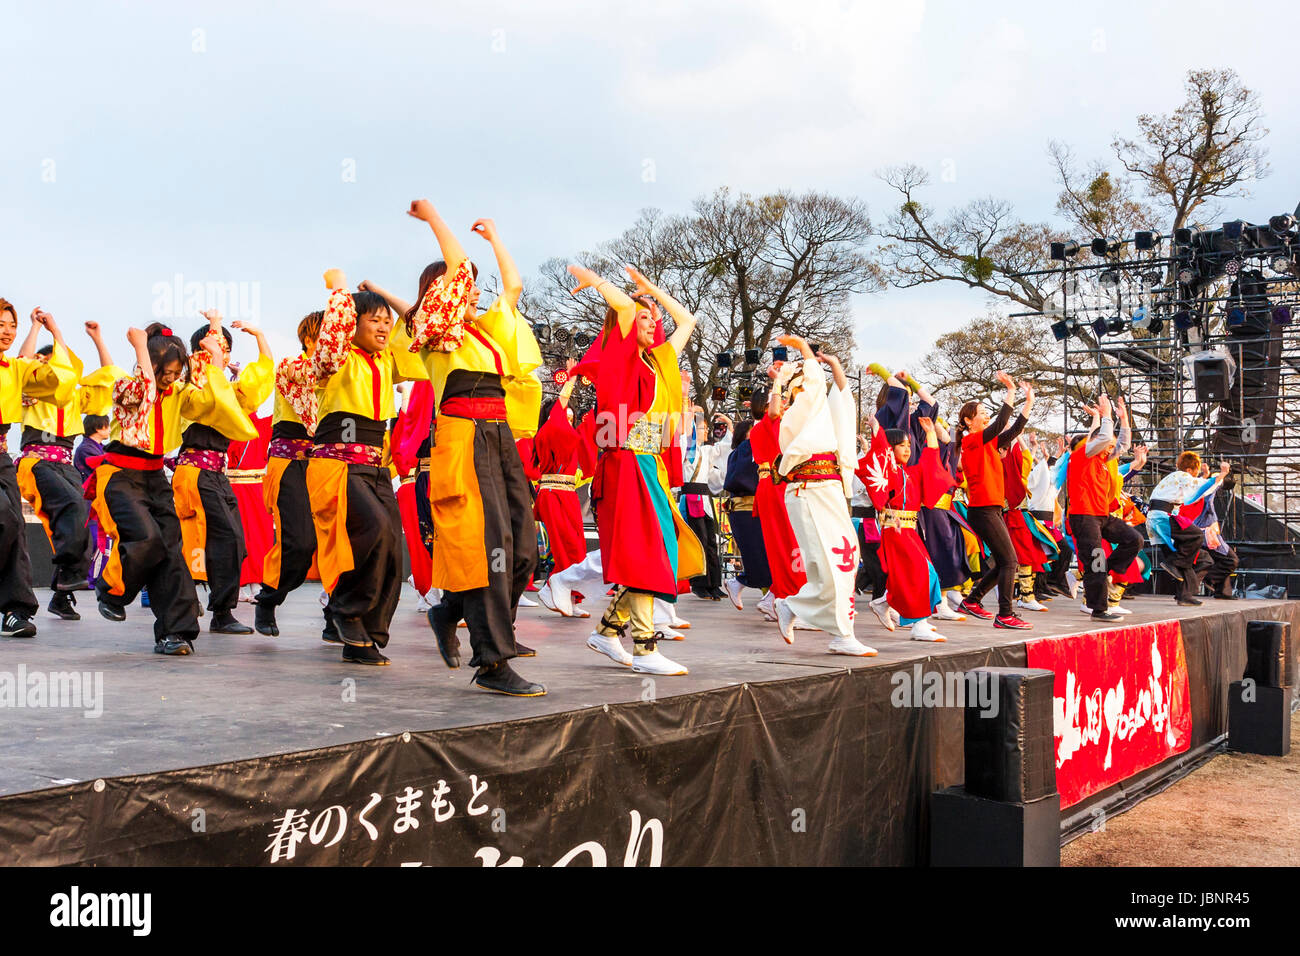 Hinokuni Yosakoi Dance Festival at Kumamoto, Japan. Members of various dance teams dancing together on stage for the grand finale of the two day event. Stock Photo